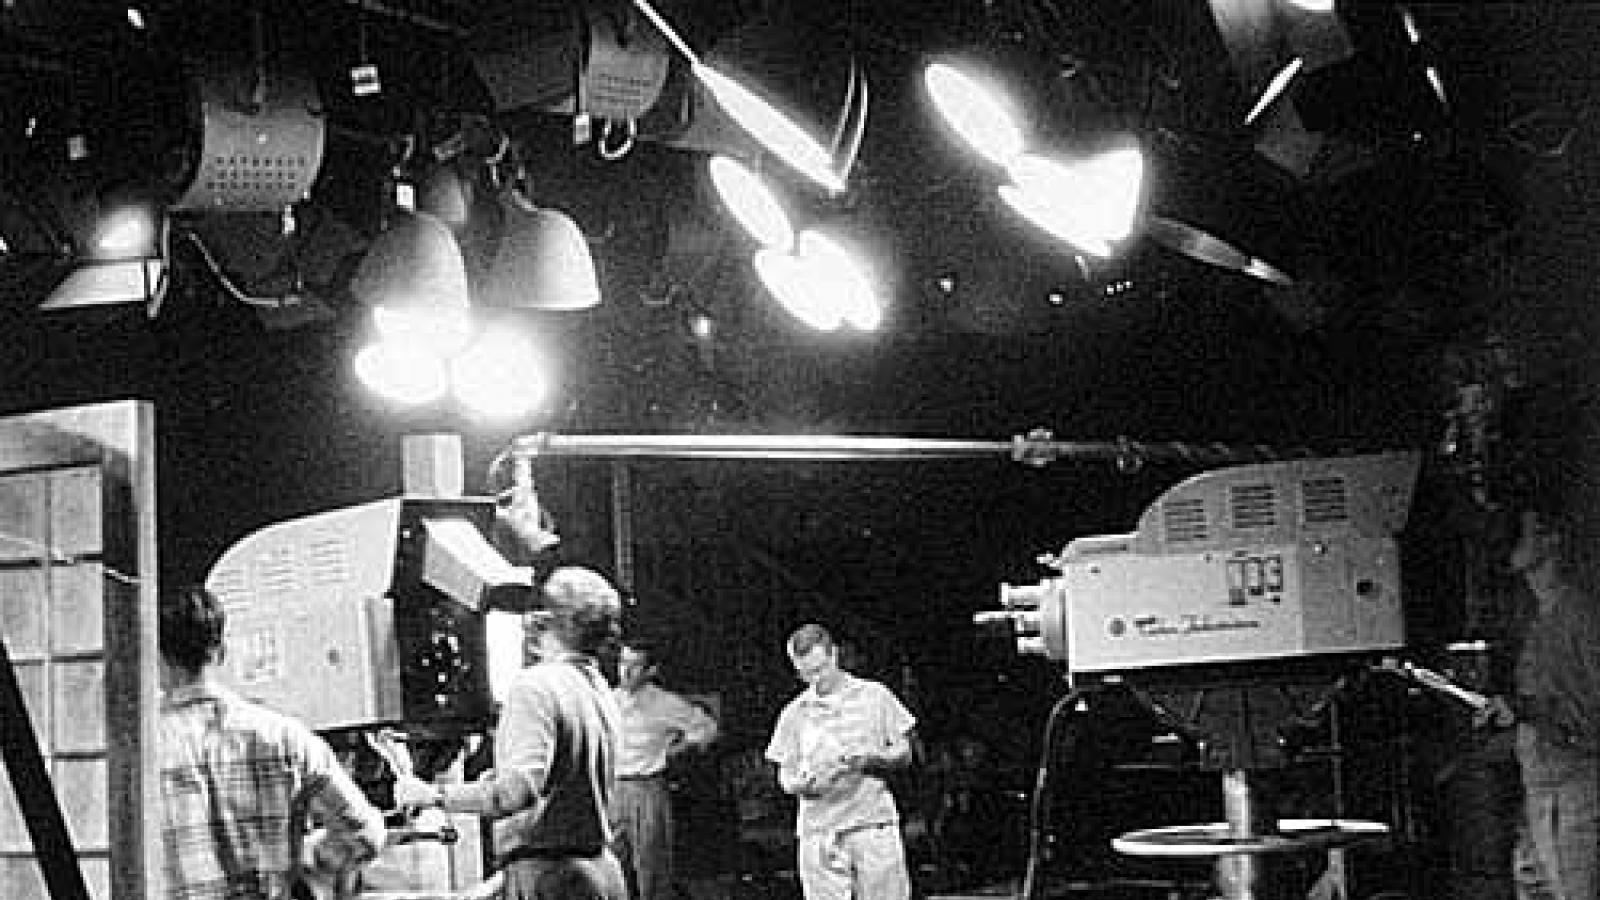 Behind the scenes at Matinee Theater at NBC Color City Studio 4 in Burbank, California. Photo courtesy of Kris Trexler